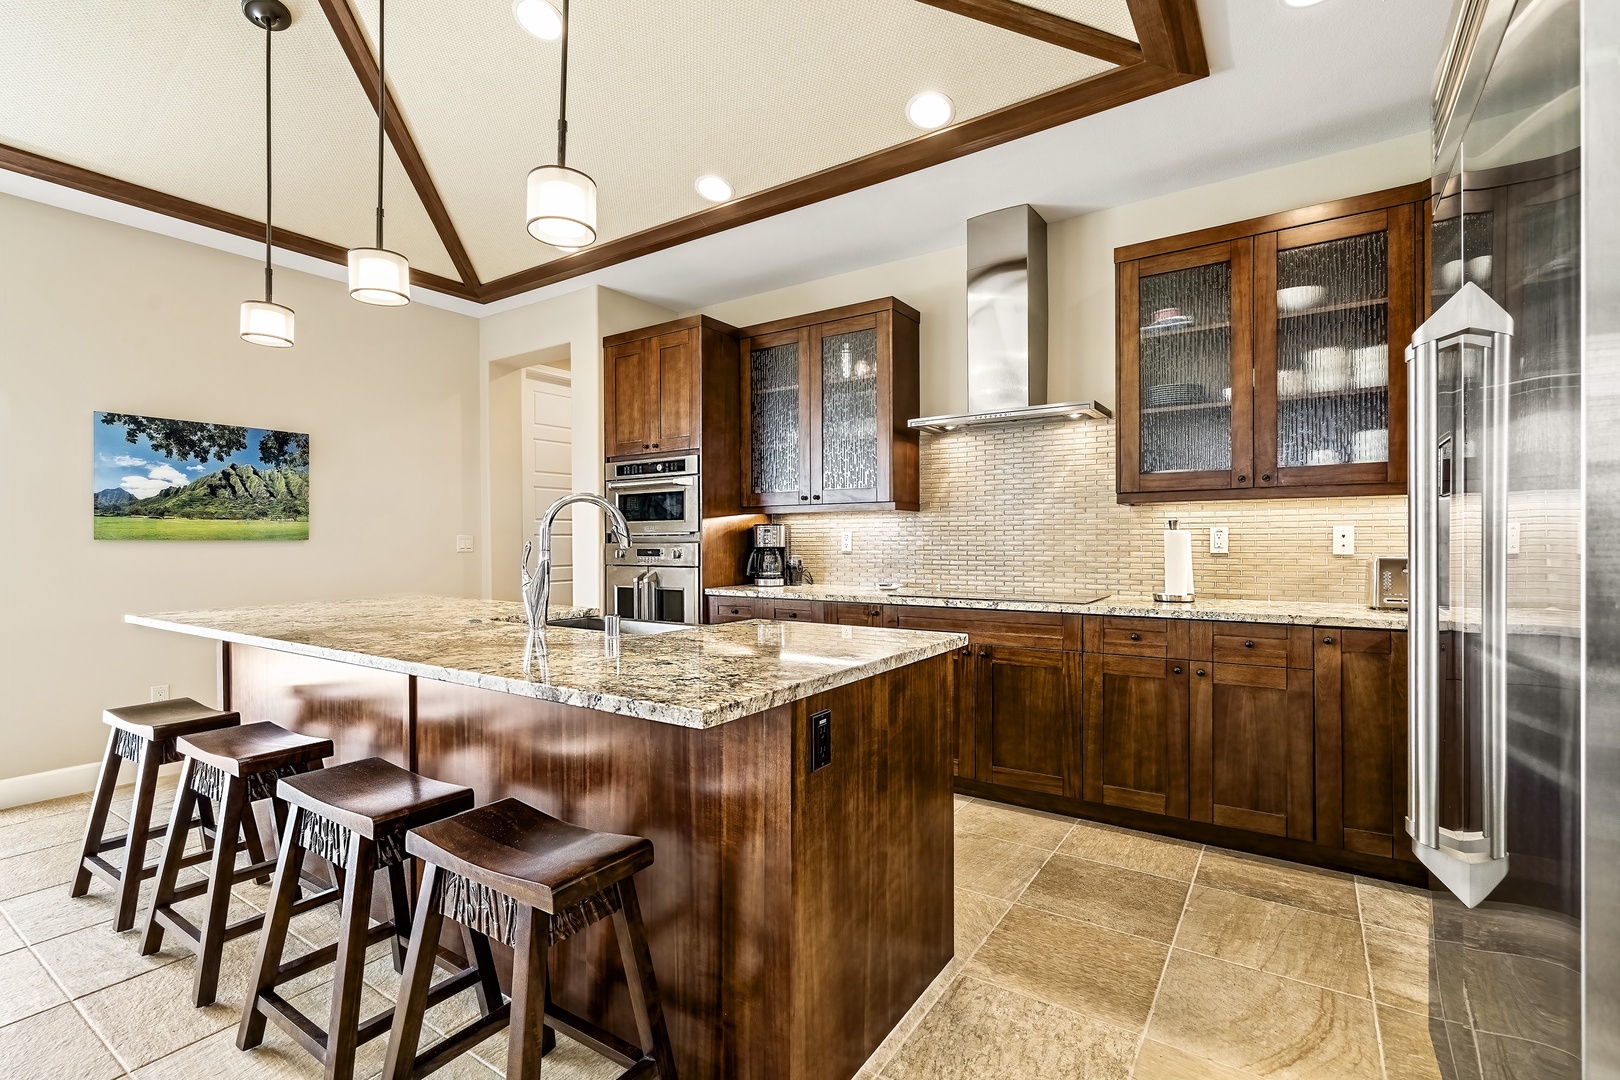 Kailua Kona Vacation Rentals, Blue Orca - Gourmet kitchen with high end appliances